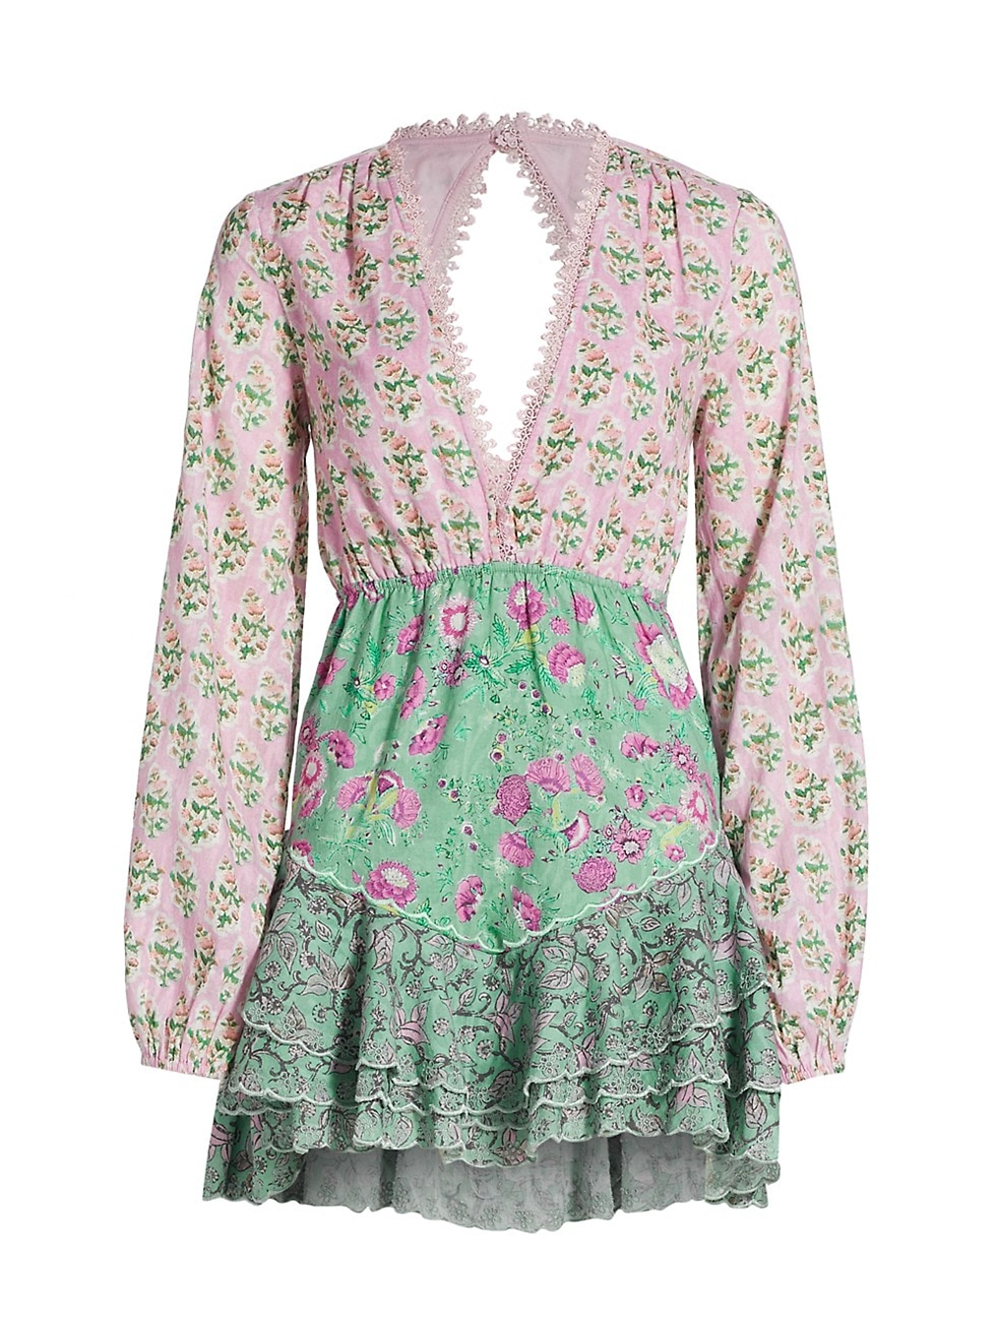 Must have pretty floral summer dresses chosen by Marla Meridith